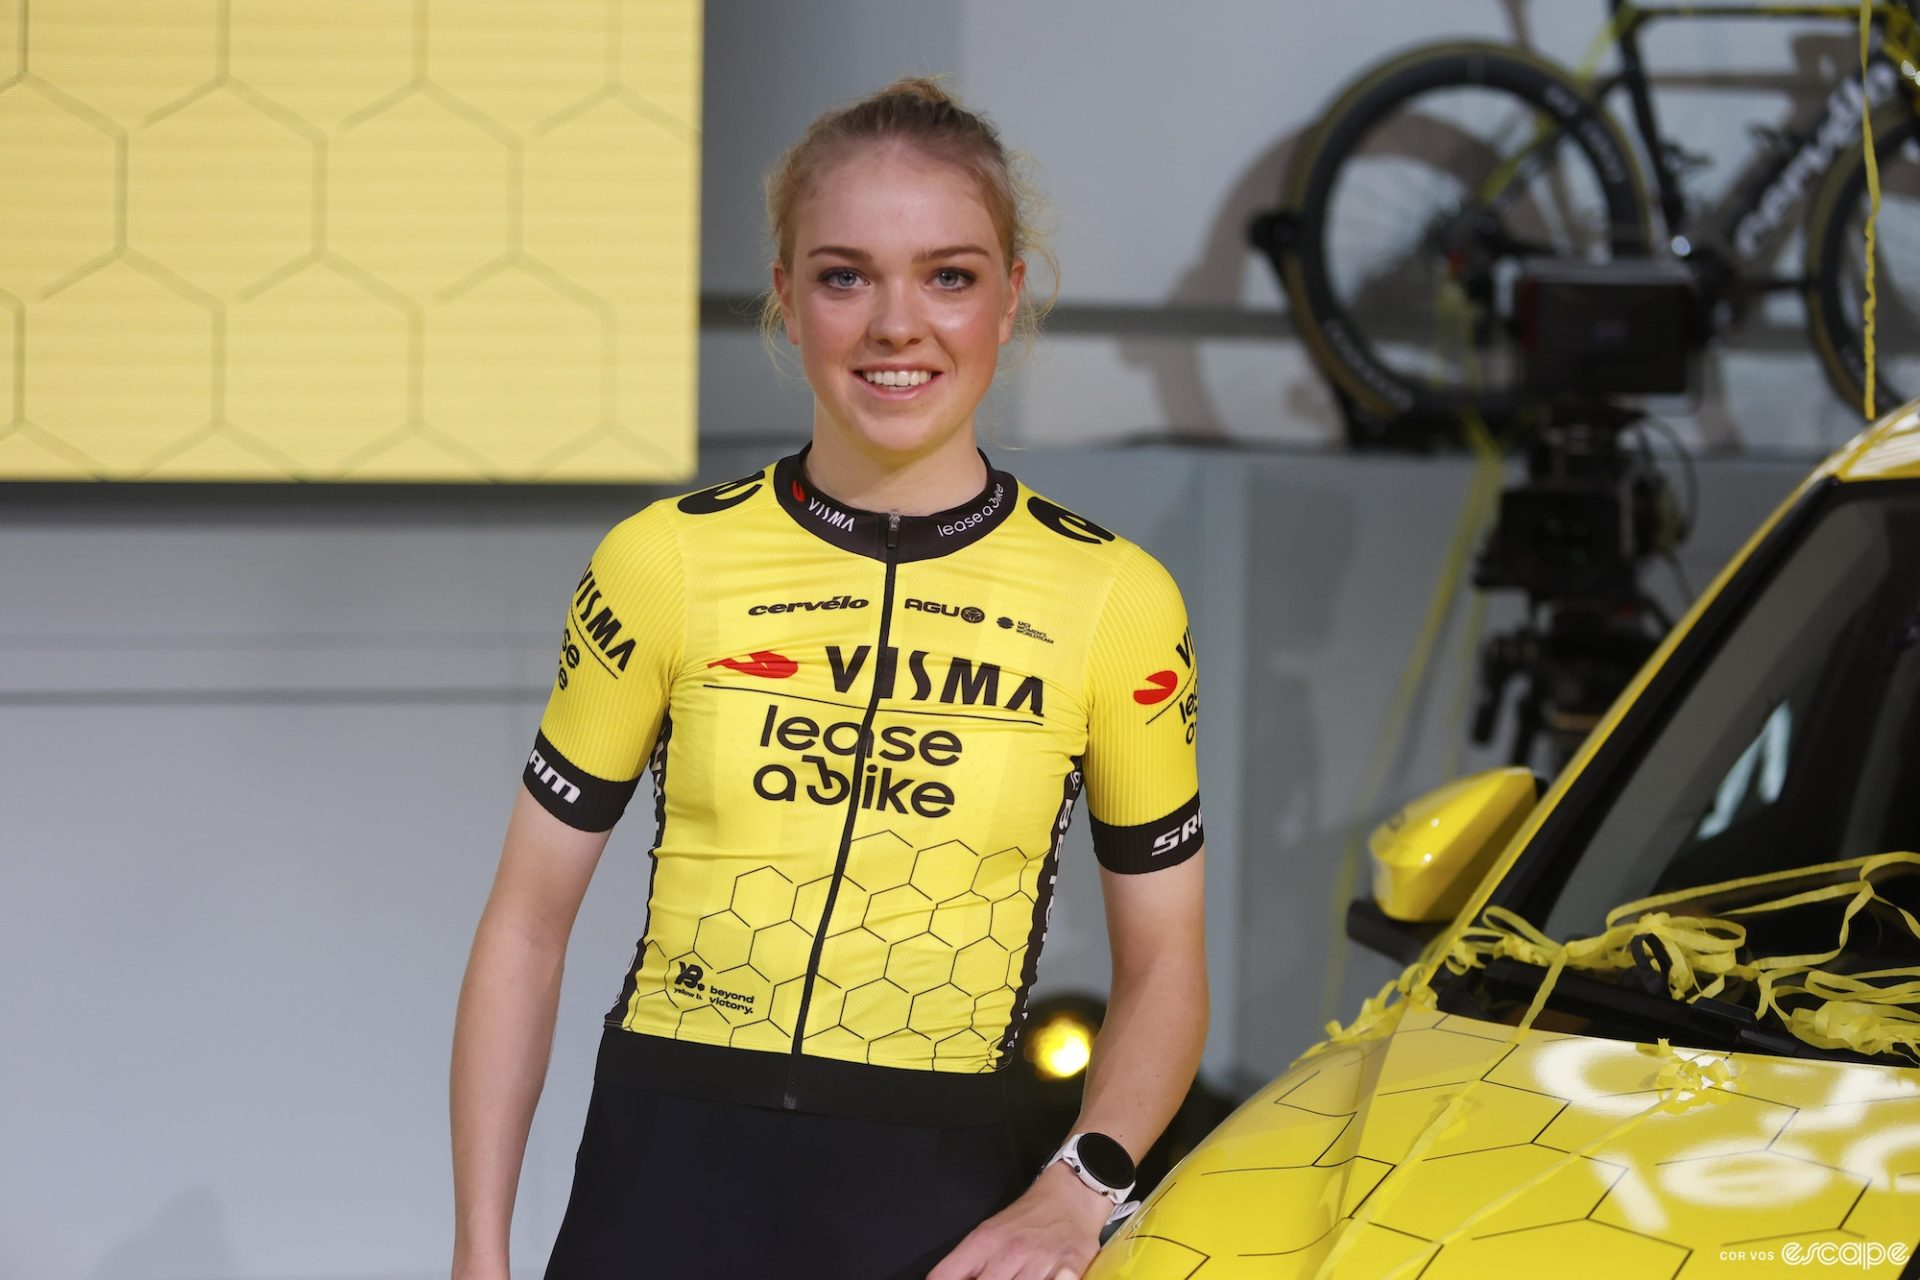 Fem van Empel leans on the hood of a car in the new Visma-Lease a Bike kit. The simple jerseys are yellow with black logos and a geometric honeycomb pattern on the lower half.